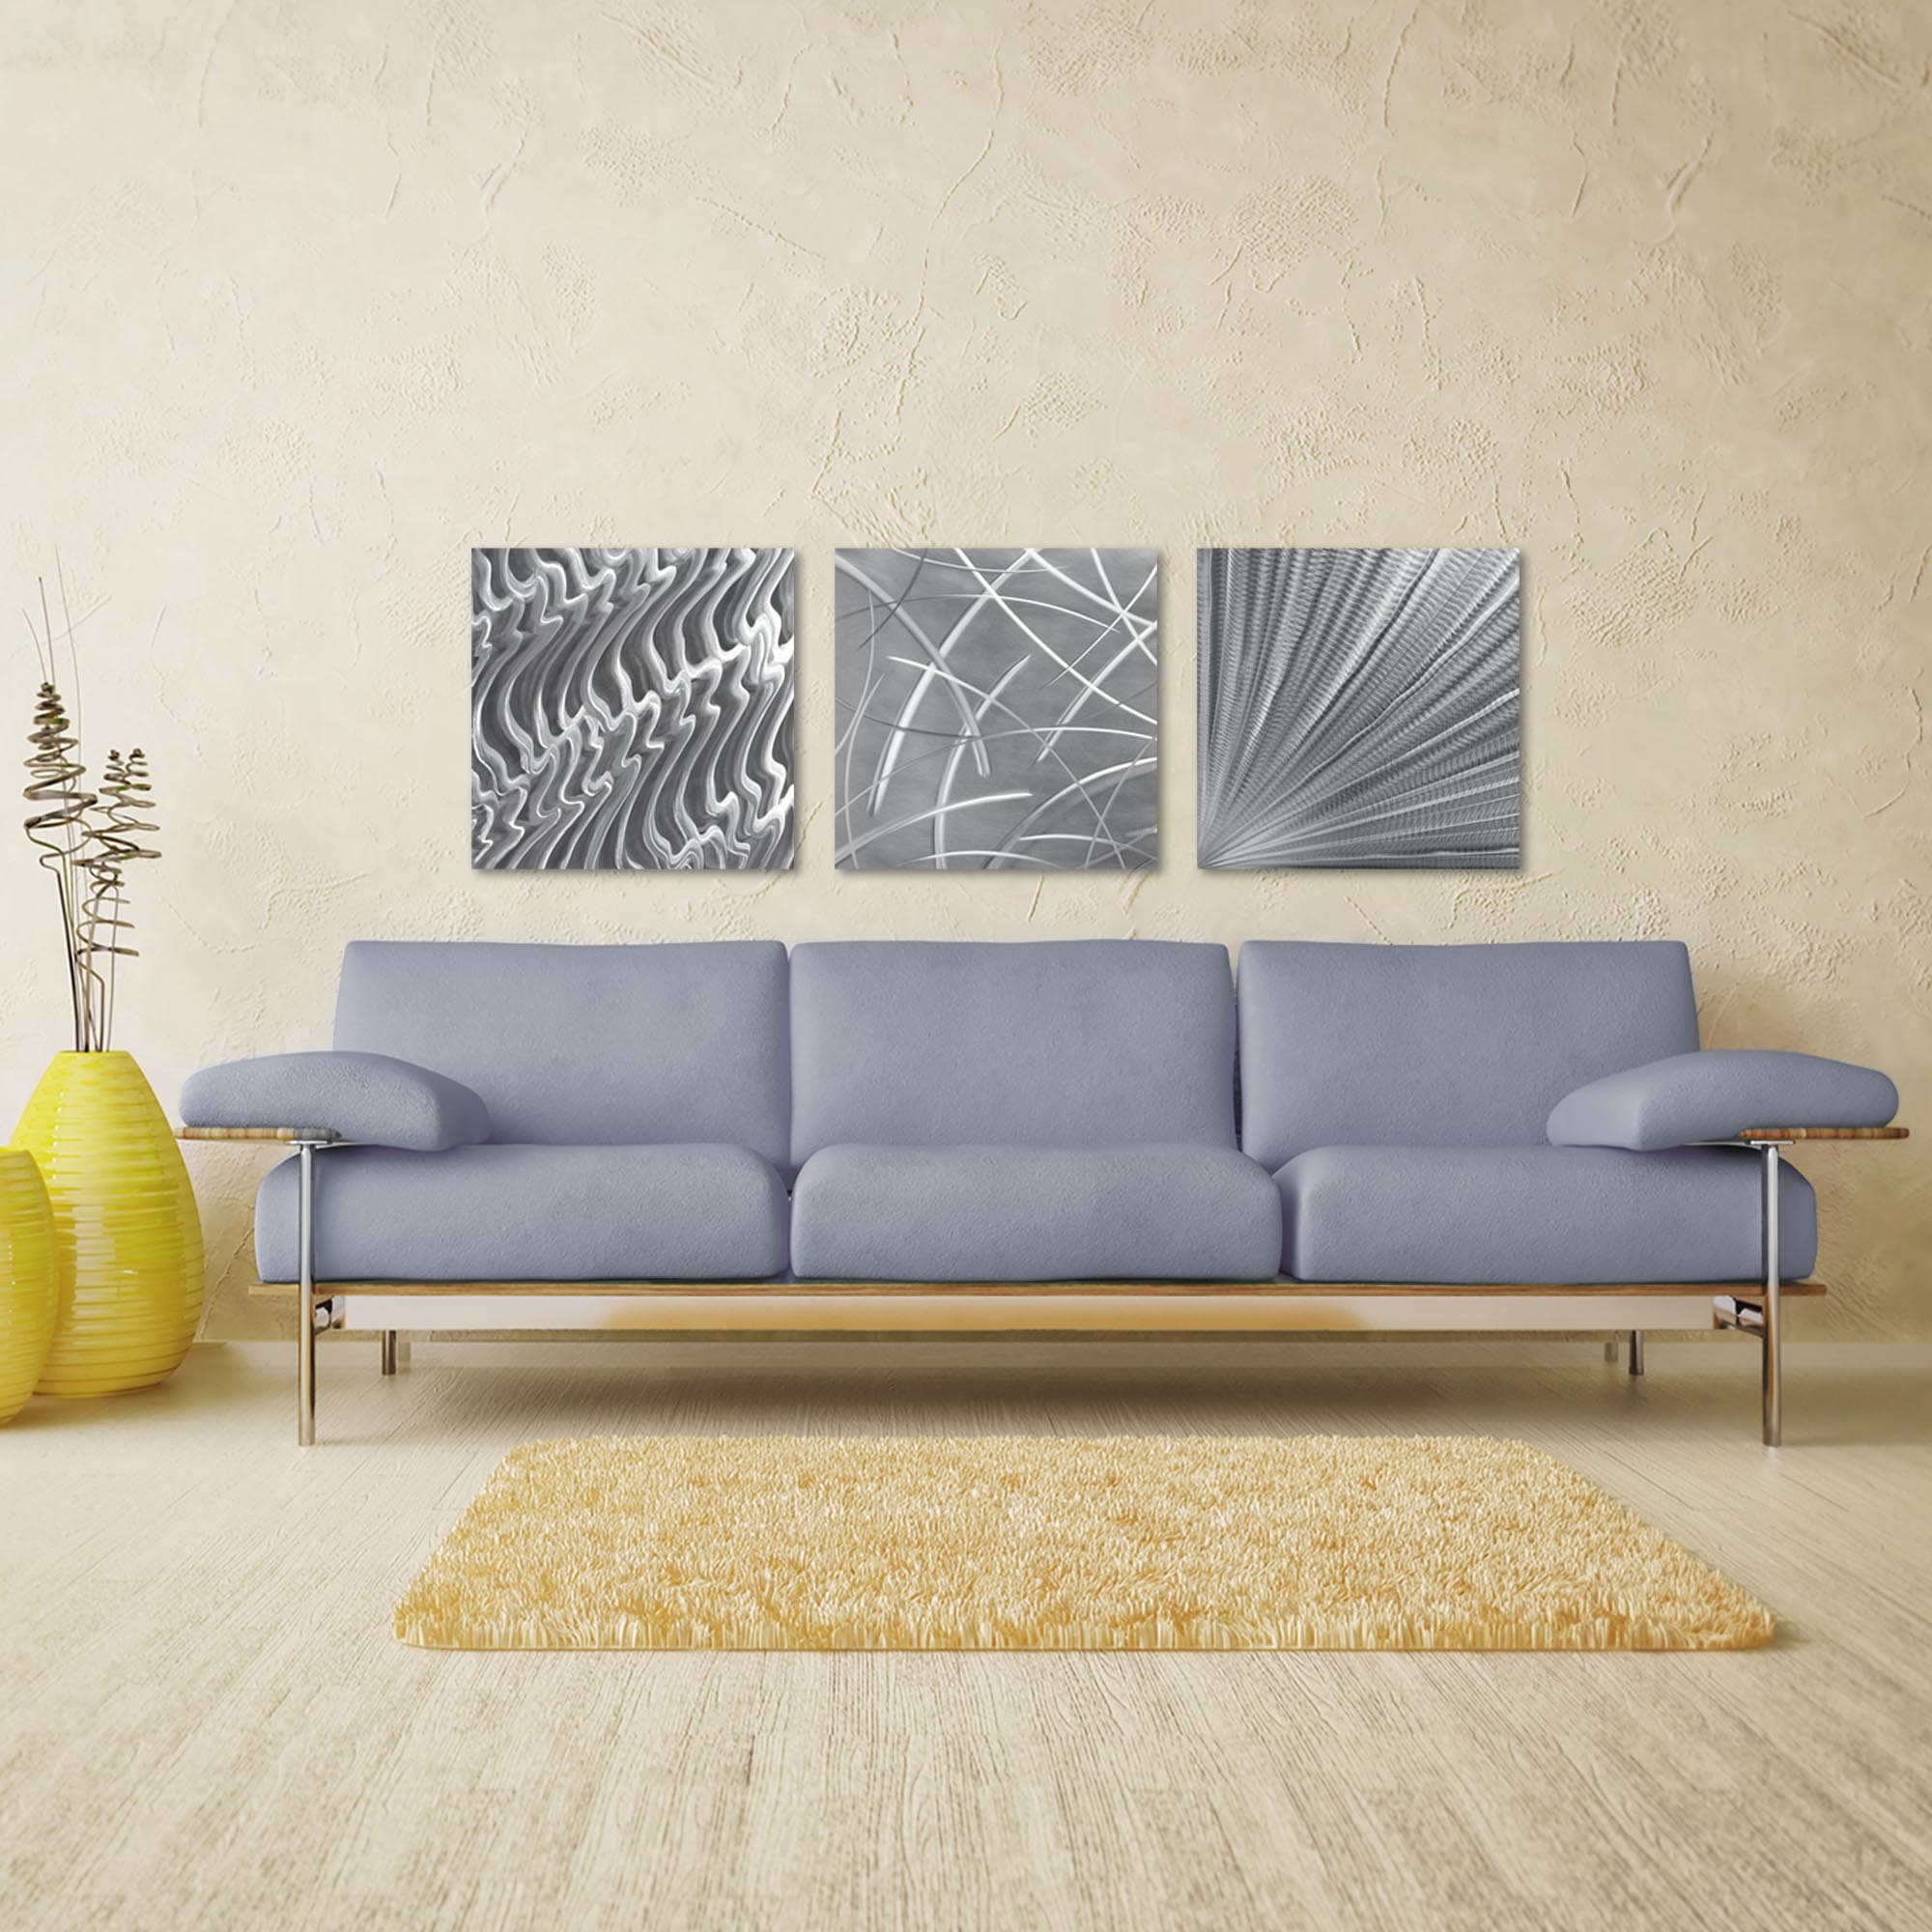 Countless v2 Triptych Large 70x22in. Metal or Acrylic Contemporary Decor - Lifestyle View